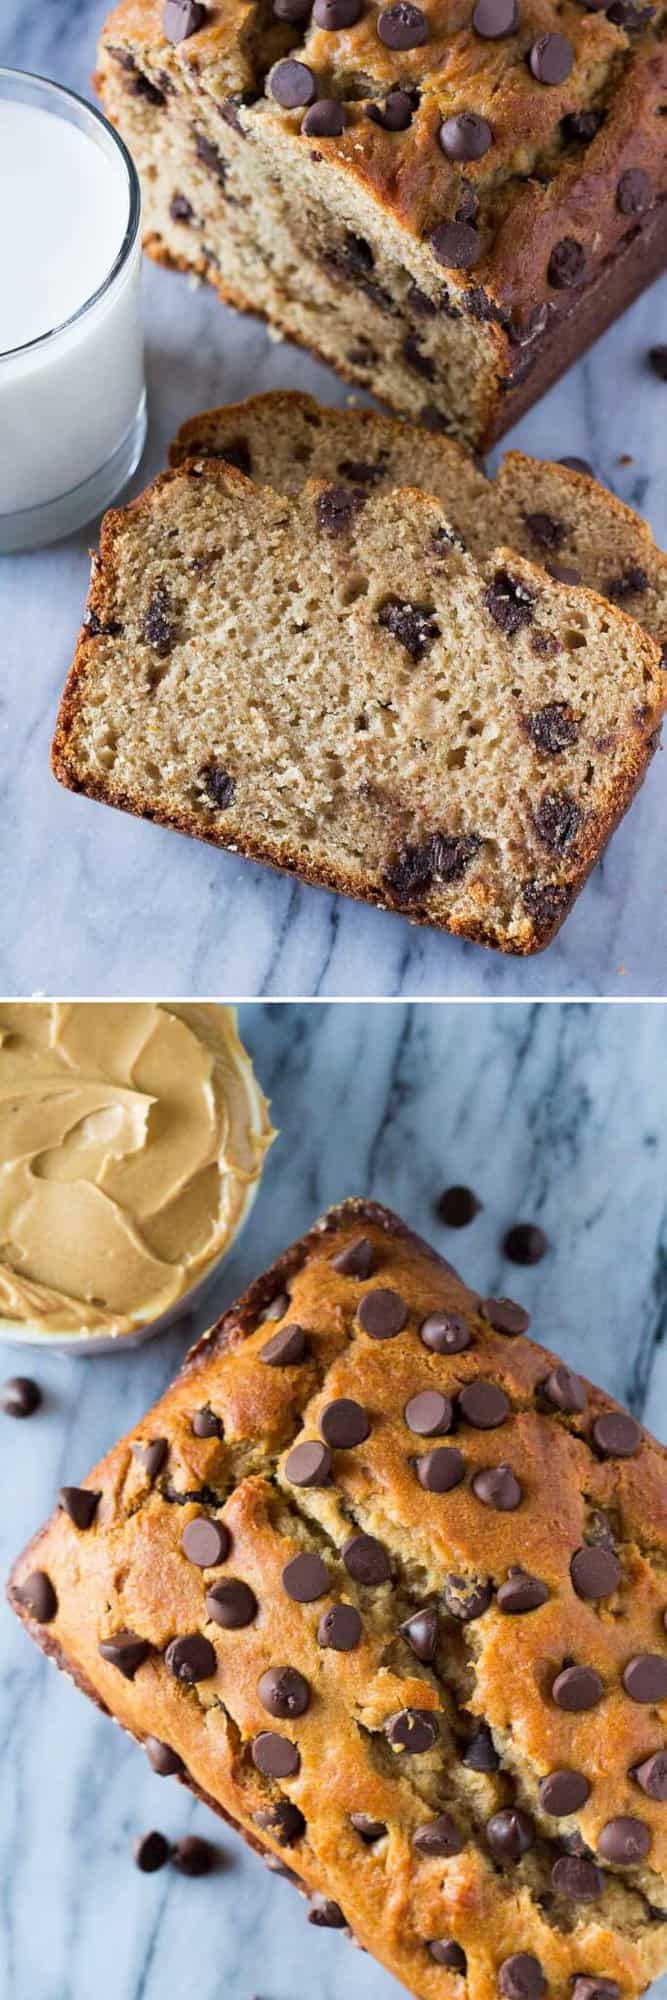 Skip the toast and make this super soft, extra flavorful, ridiculously moist Peanut Butter Chocolate Chip Bread.